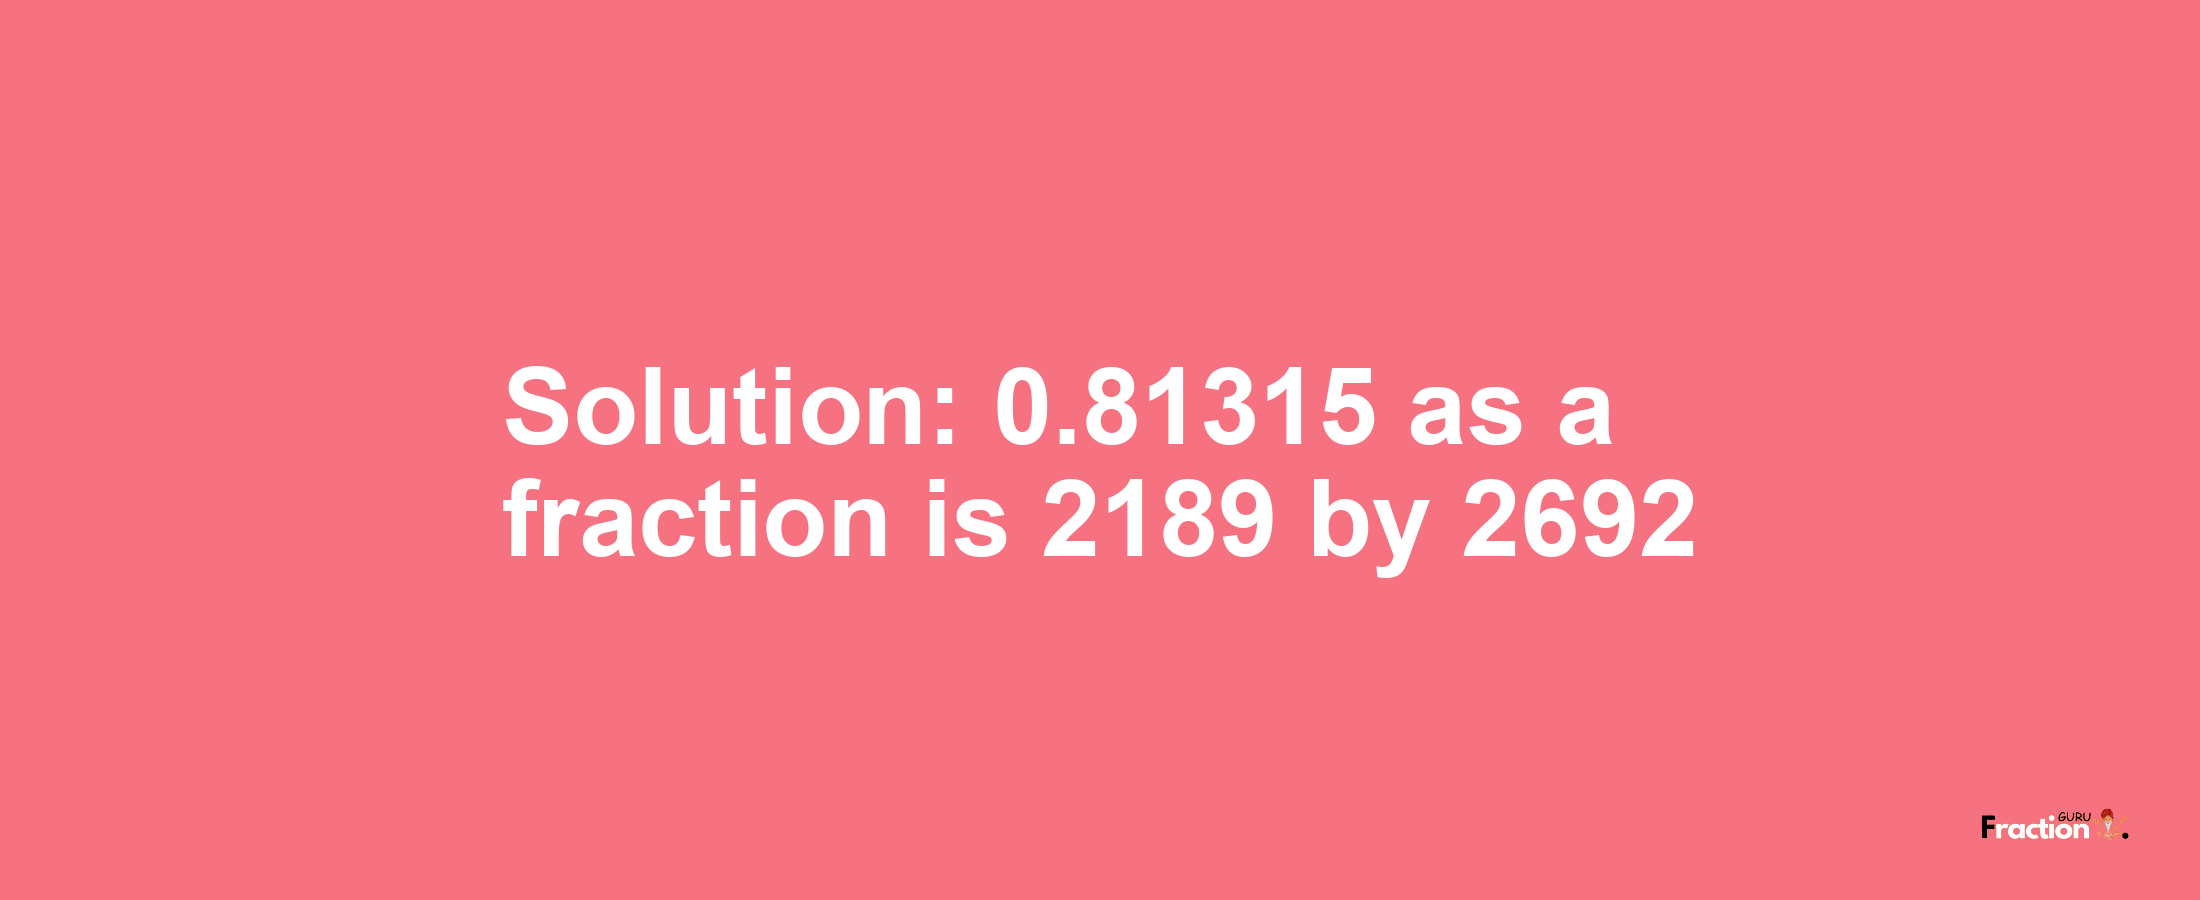 Solution:0.81315 as a fraction is 2189/2692